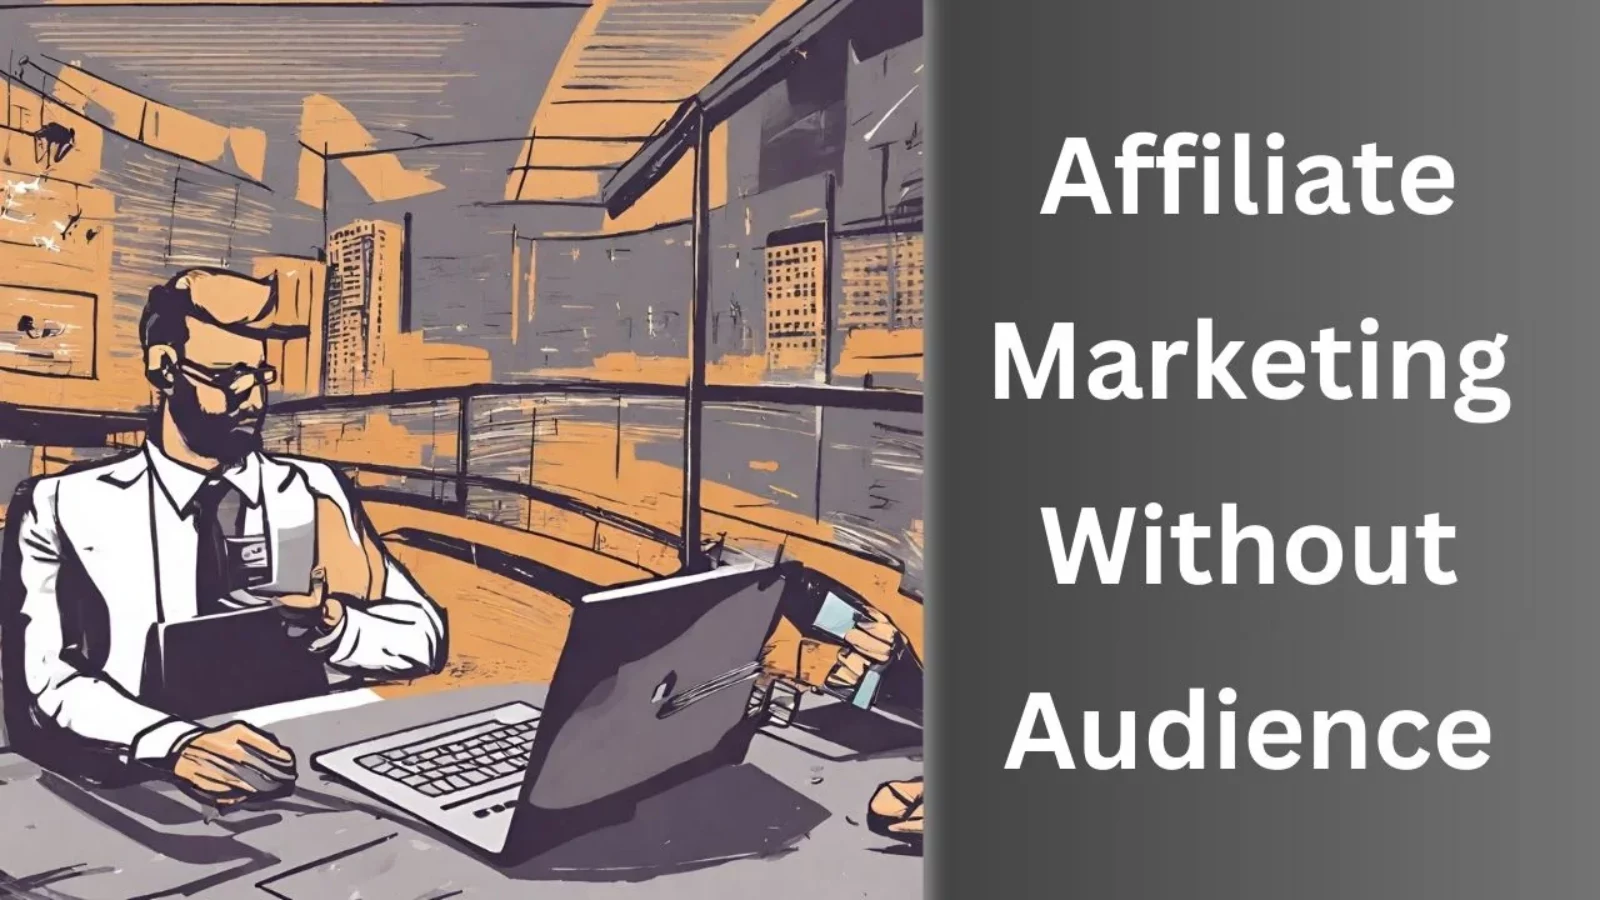 How To Start Affiliate Marketing With No Audience